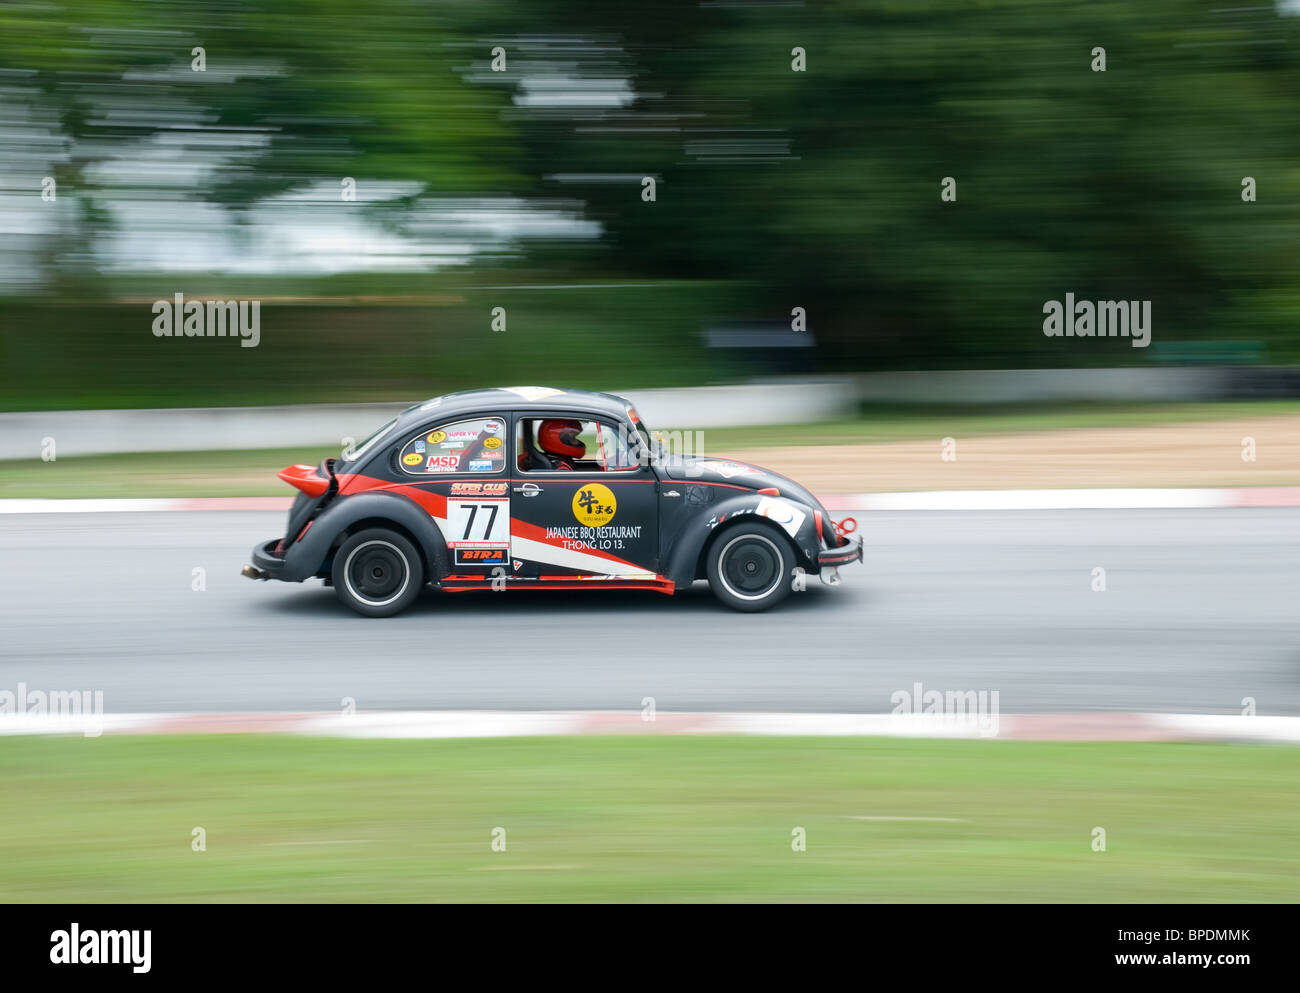 Vintage Volkswagen Beetle during a classic car race at Bira Circuit in Pattaya, Thailand Stock Photo